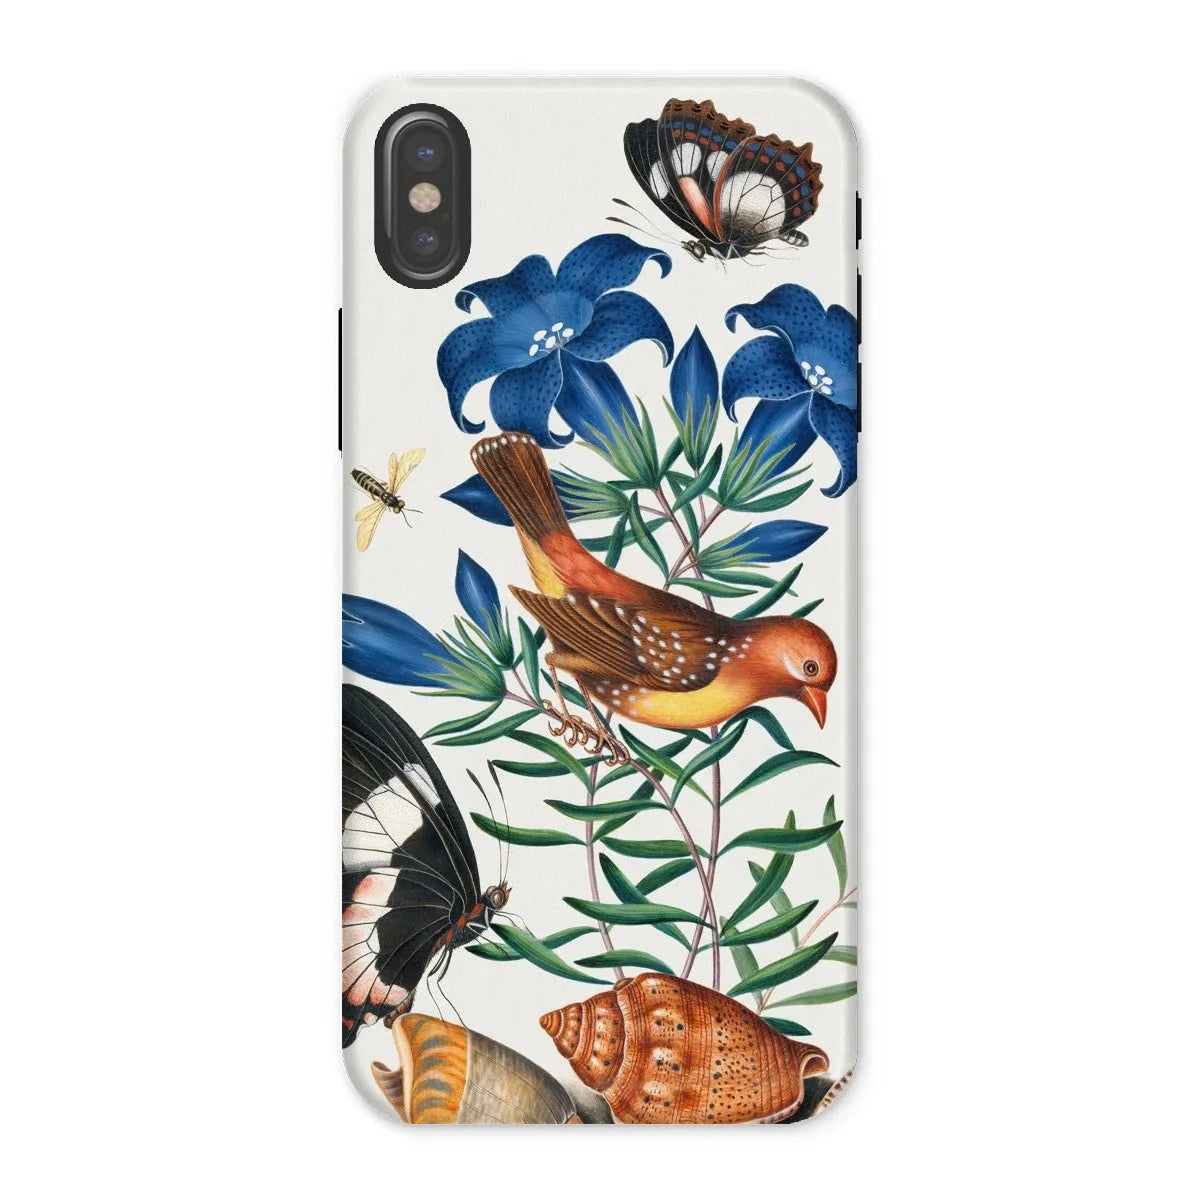 Avadavat Gentian Sawfly Swallowtail And Shells Phone Case - James Bolton - Iphone x / Matte - Mobile Phone Cases